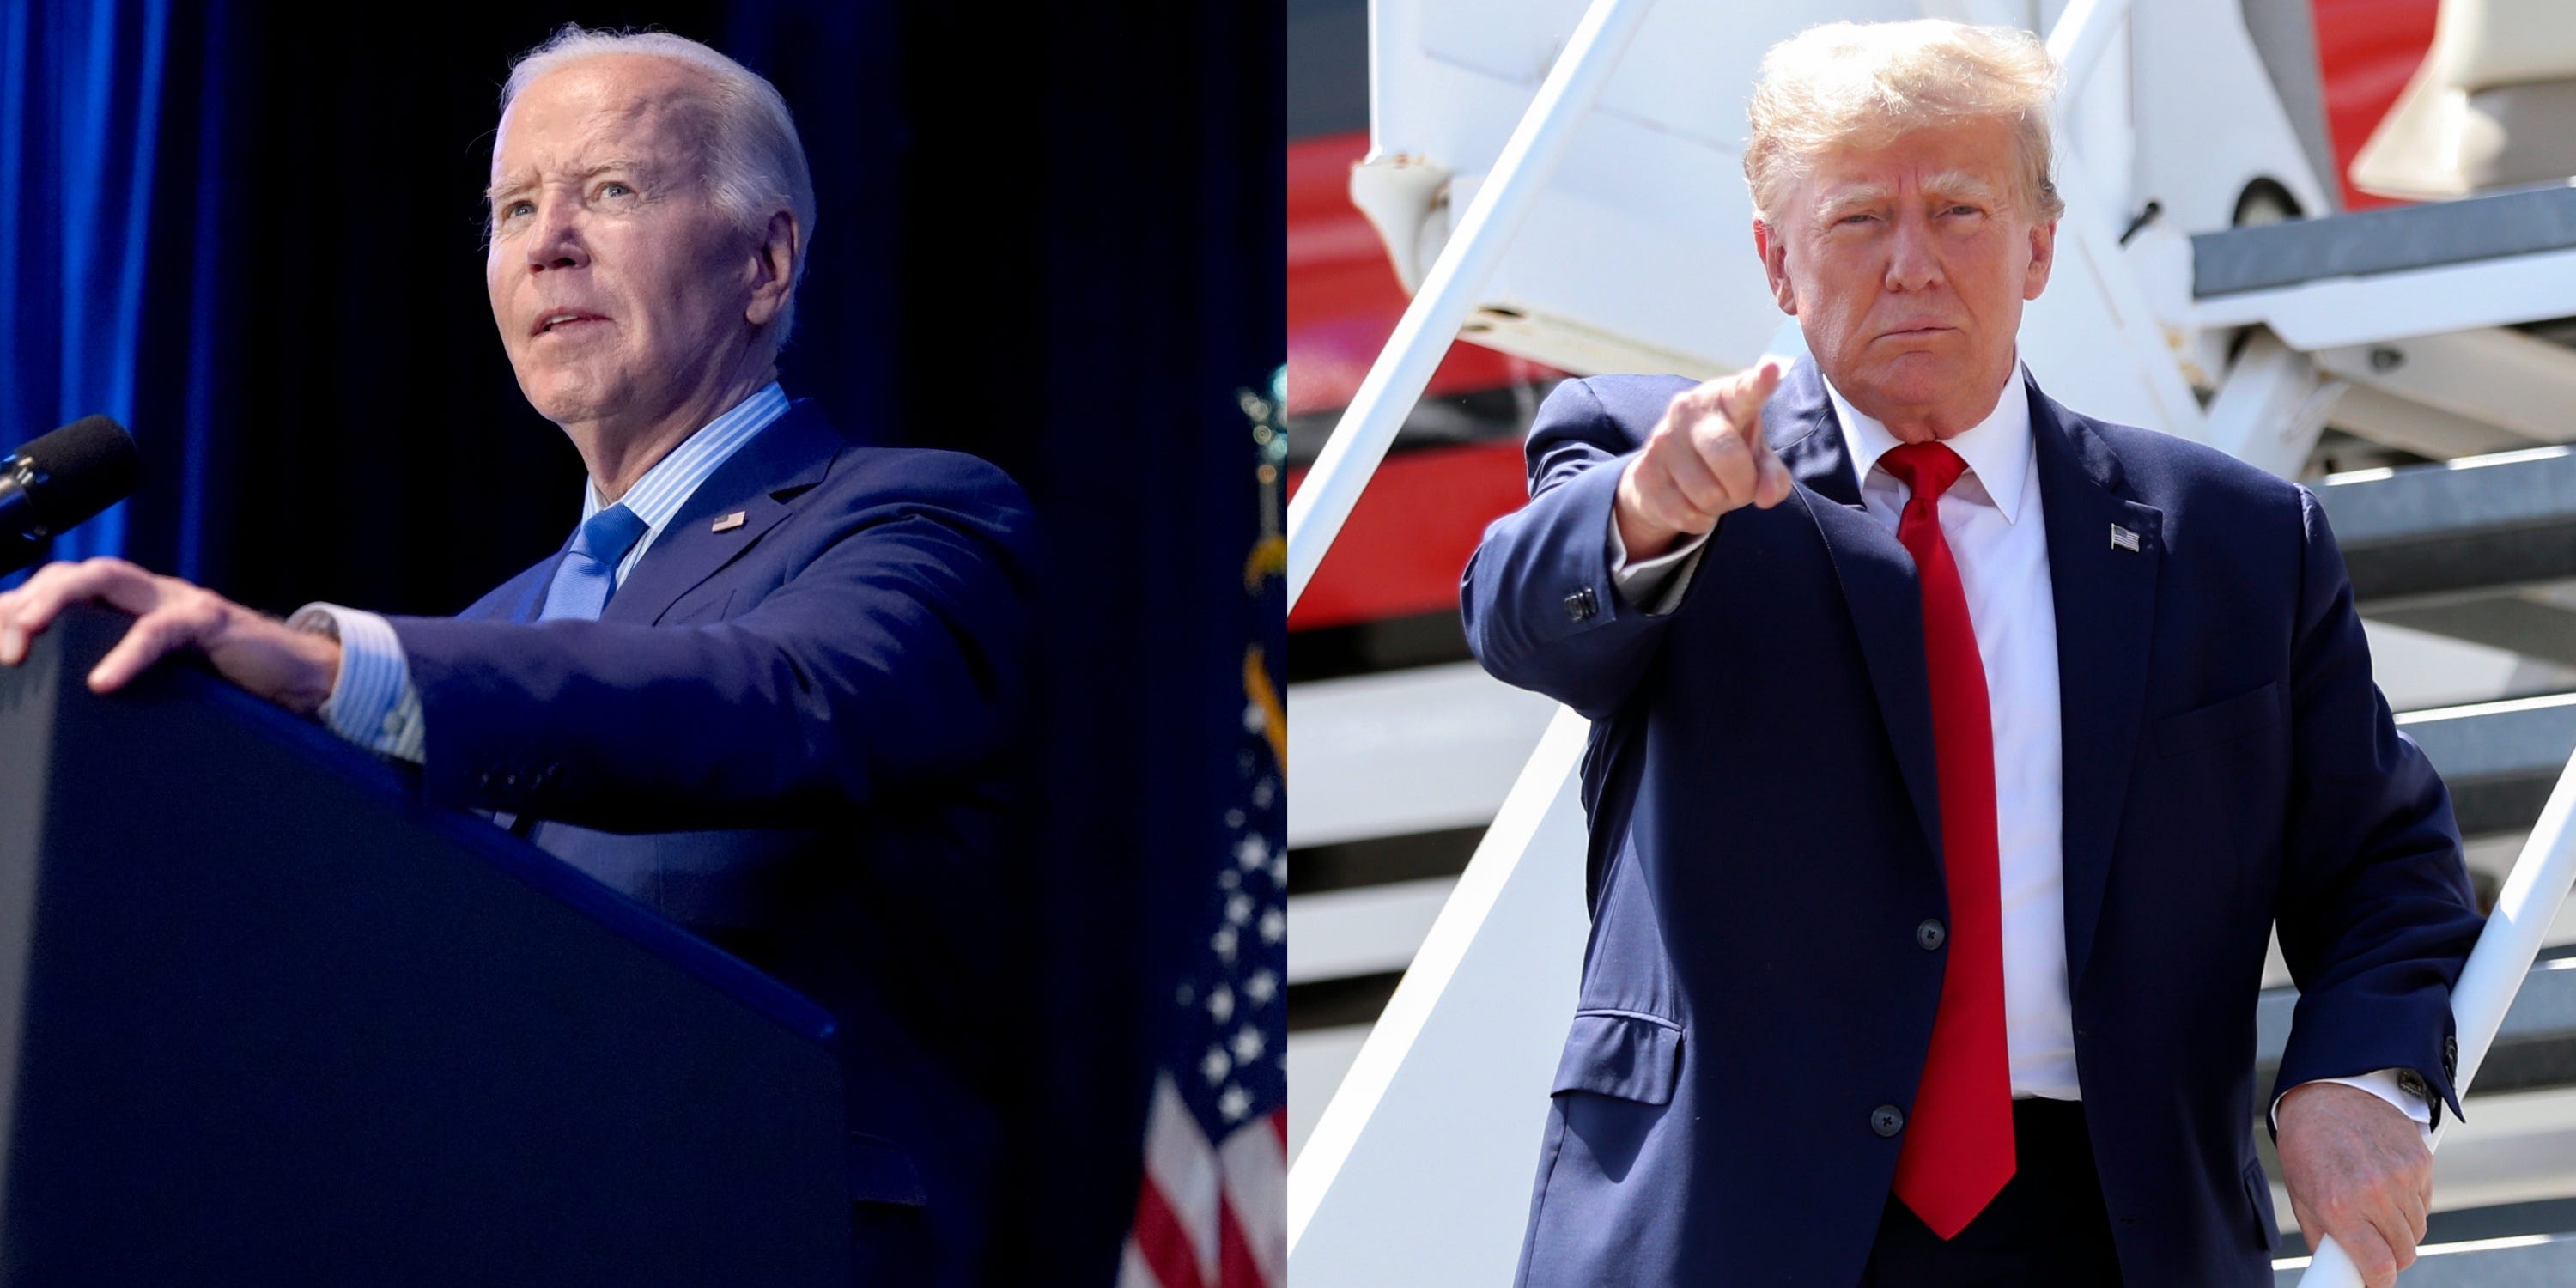 in a likely biden-trump rematch, voters known as 'double haters' are poised to determine the election. who are they?